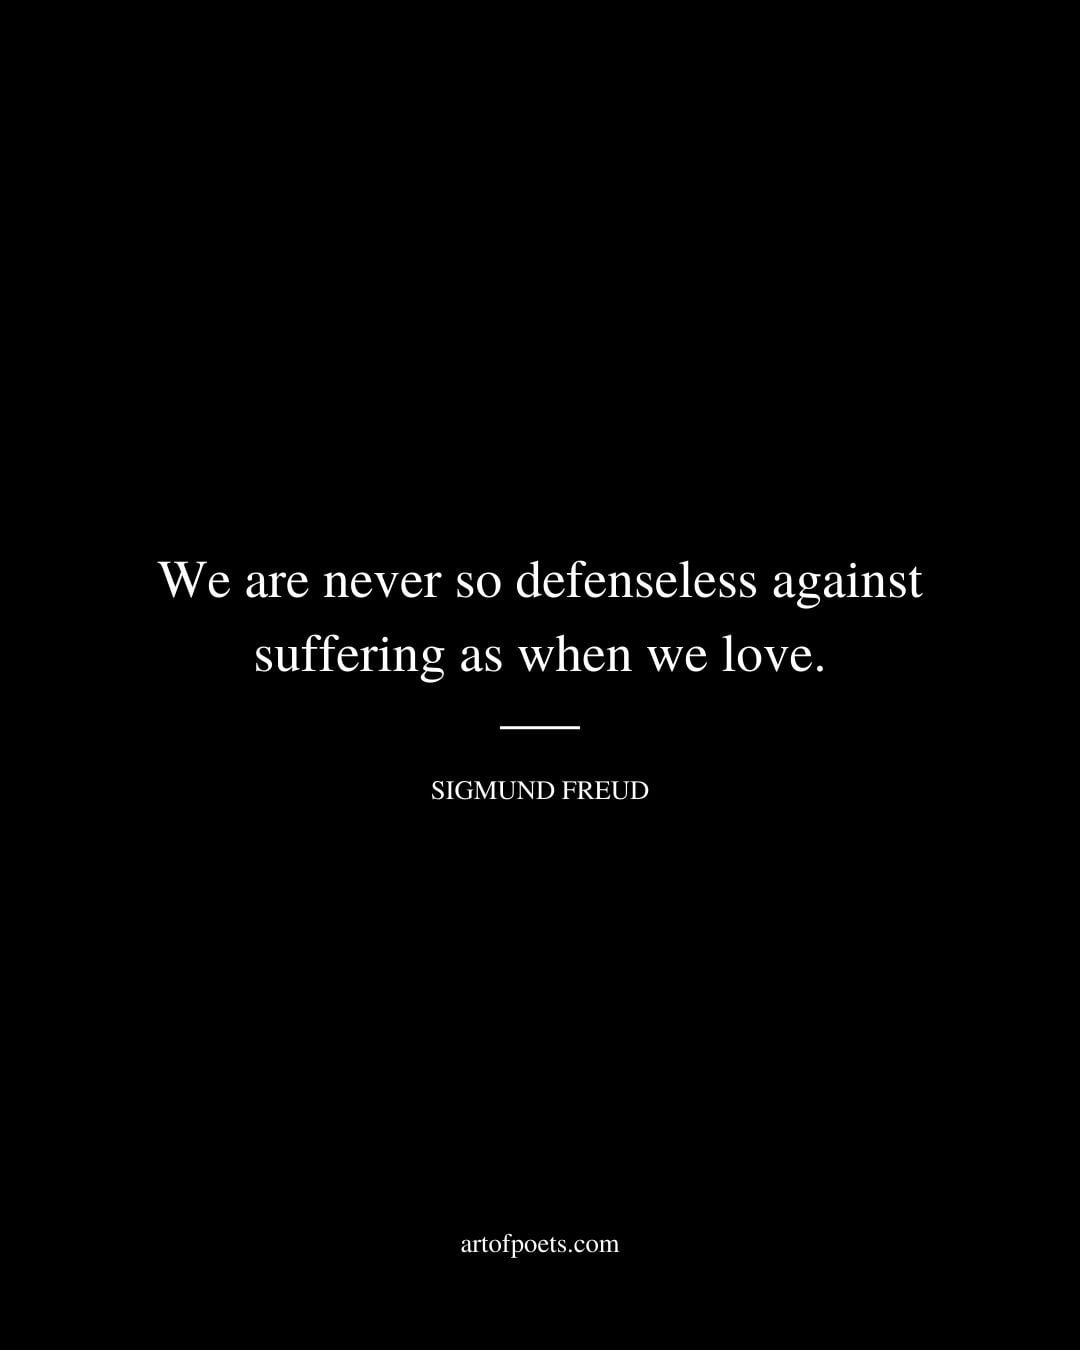 We are never so defenseless against suffering as when we love